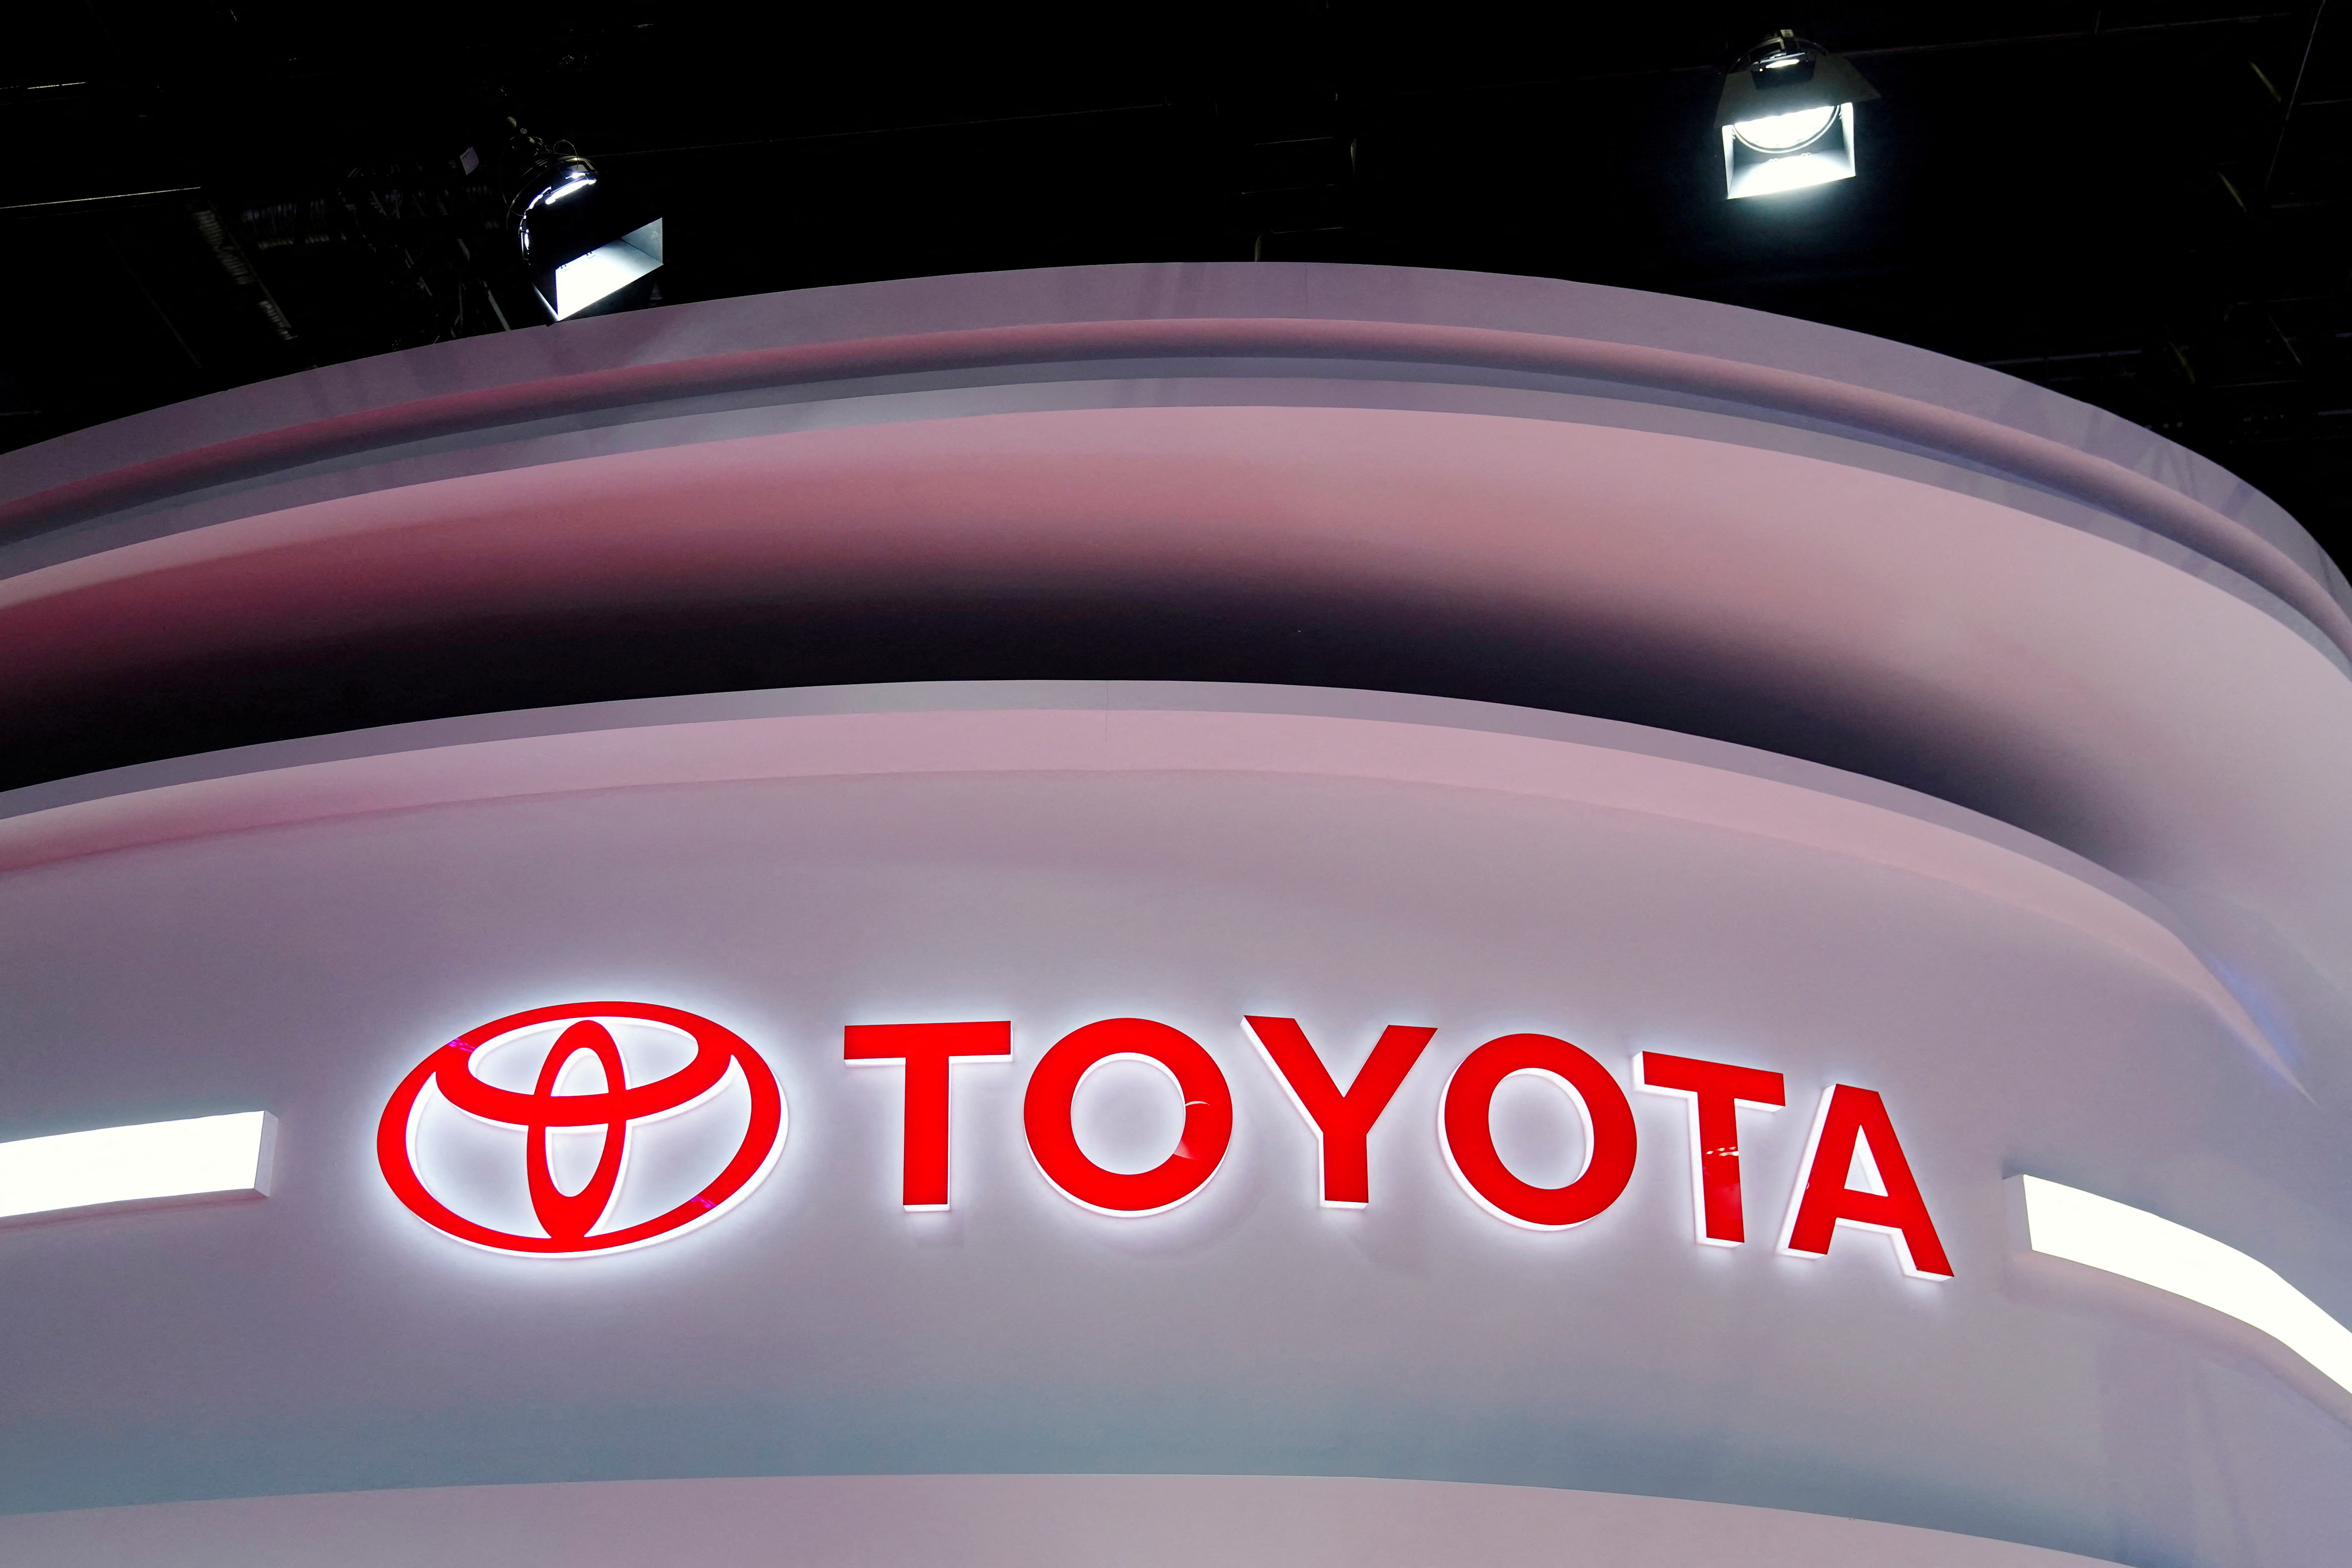 The Toyota logo is seen at its booth during a media day for the Auto Shanghai show